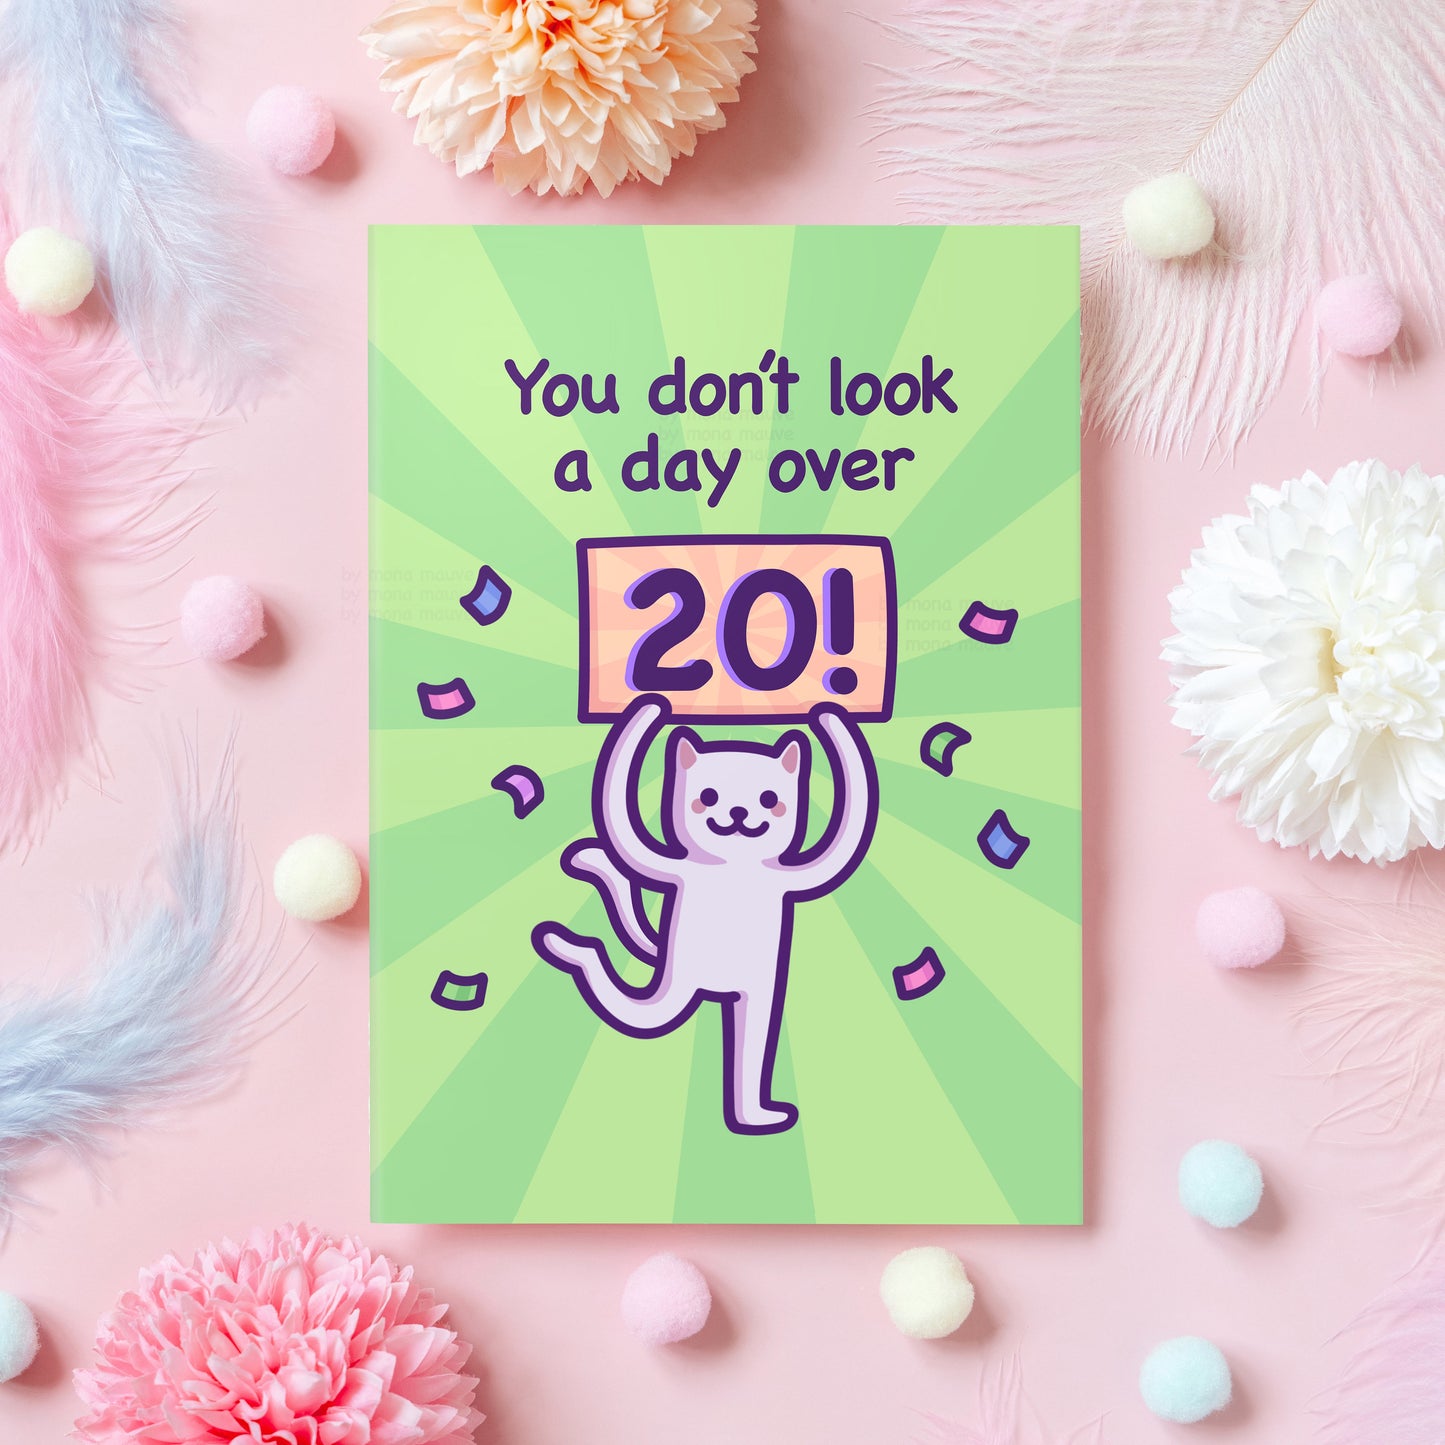 Personalised Funny Cat Birthday Card | You Don't Look a Day Over... | Customisable Birthday Gift for Wife, Husband, Mom, Sister - Her or Him